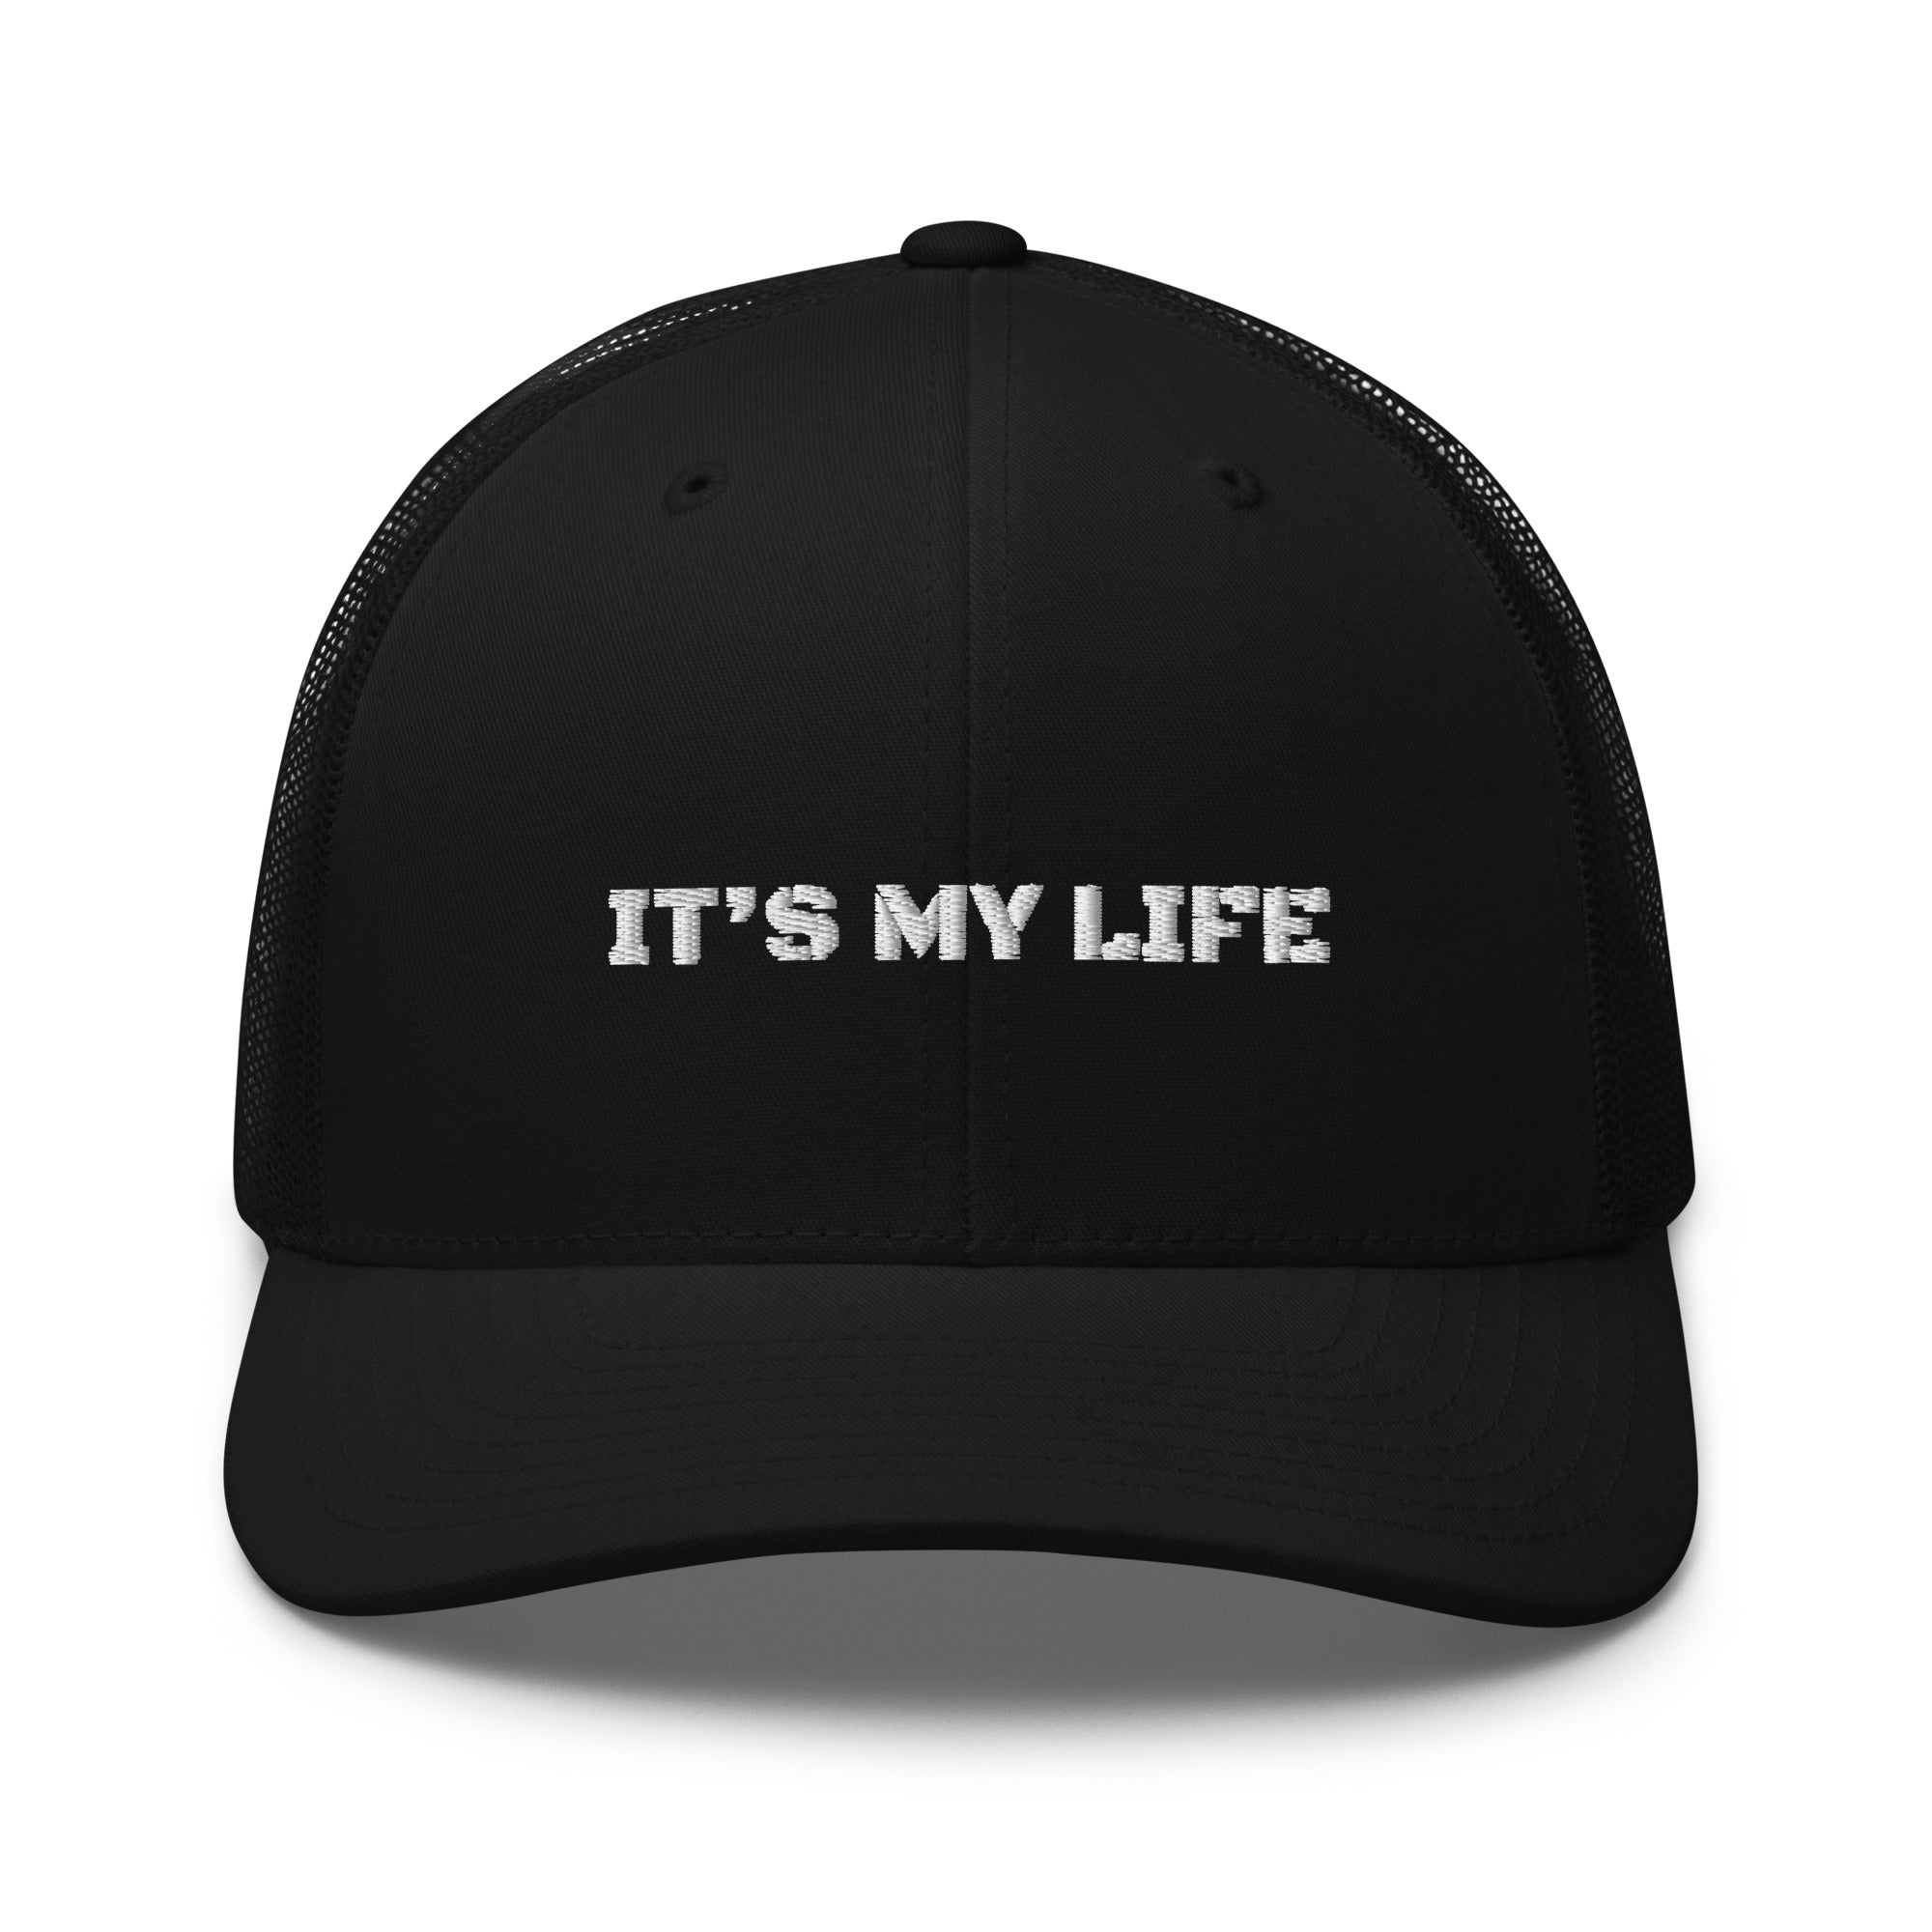 MB “It’s my life” embroidered Trucker cap